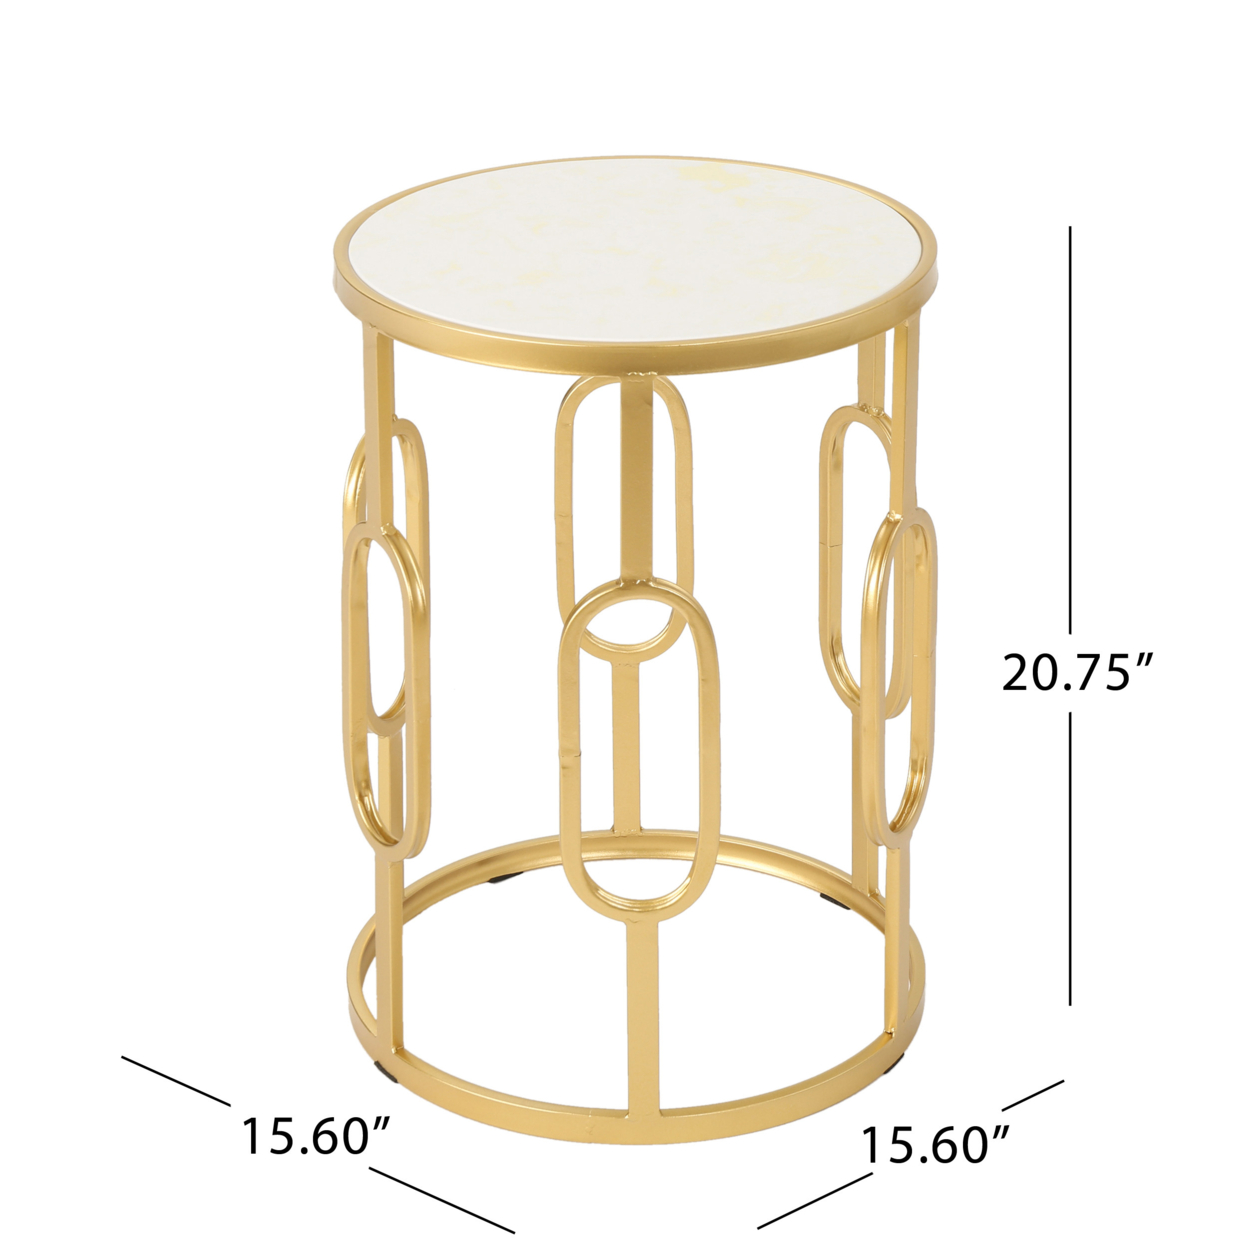 Madison Indoor Glam 16 Inch Side Table, White Finish Faux Stone - image 3 of 7